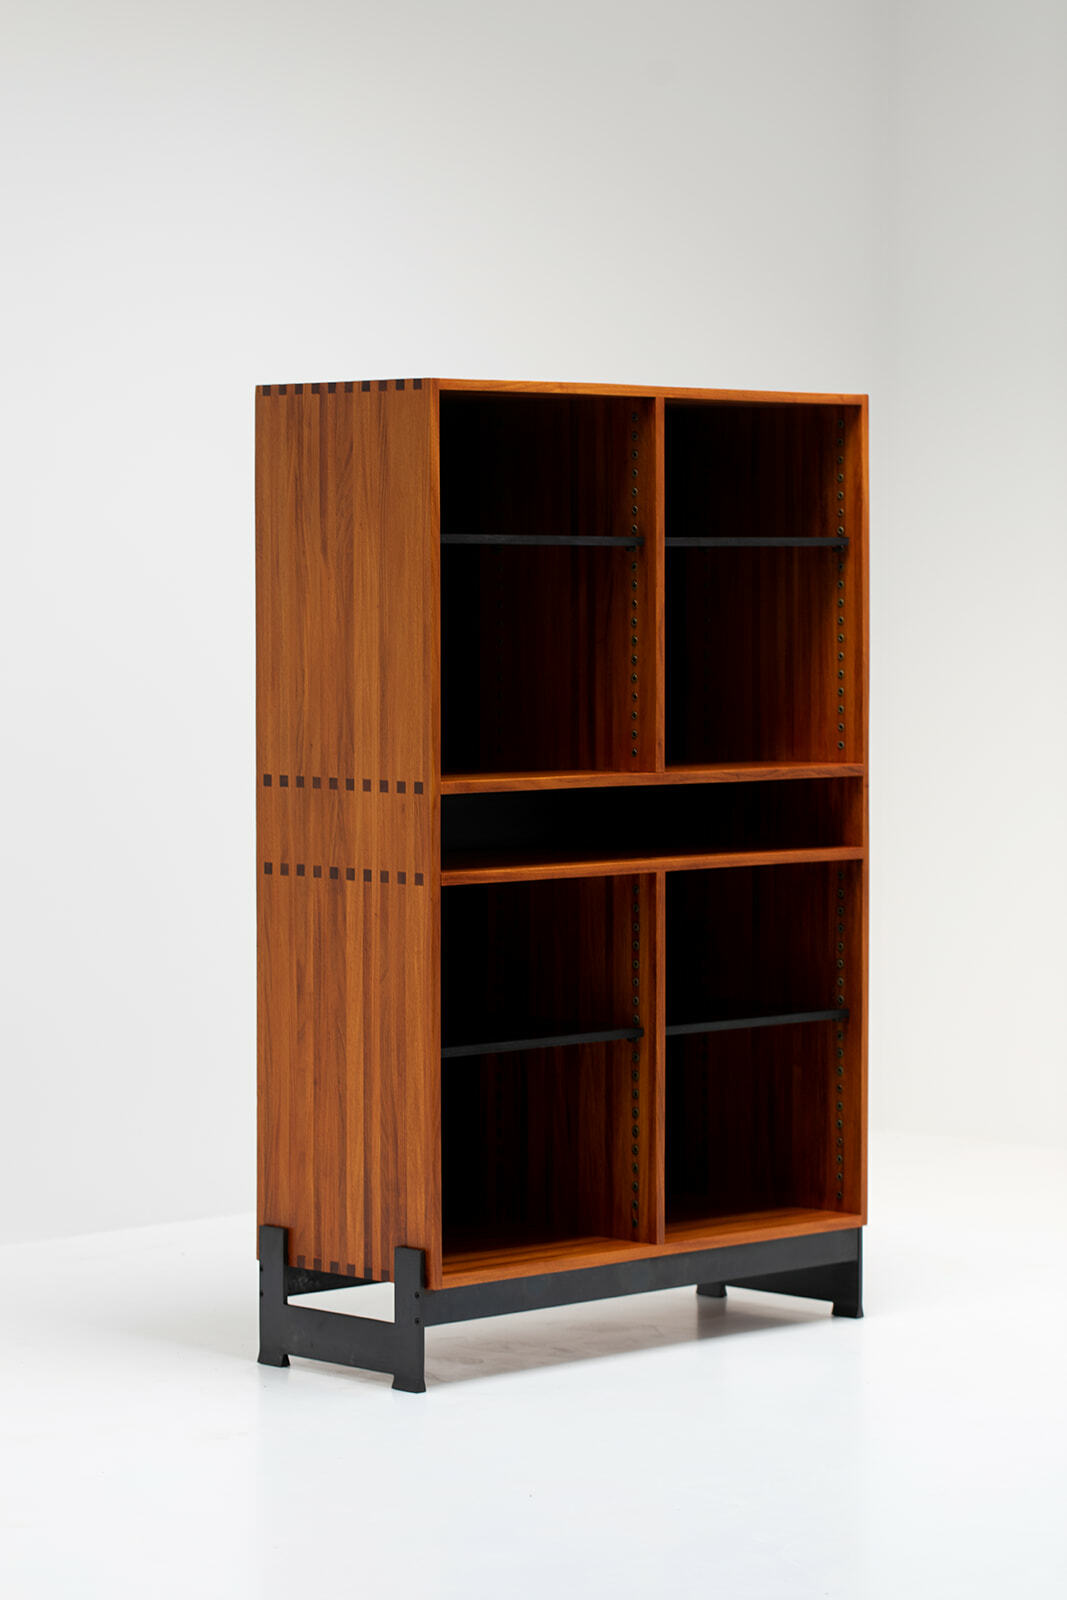 Jules Wabbes Bookcase